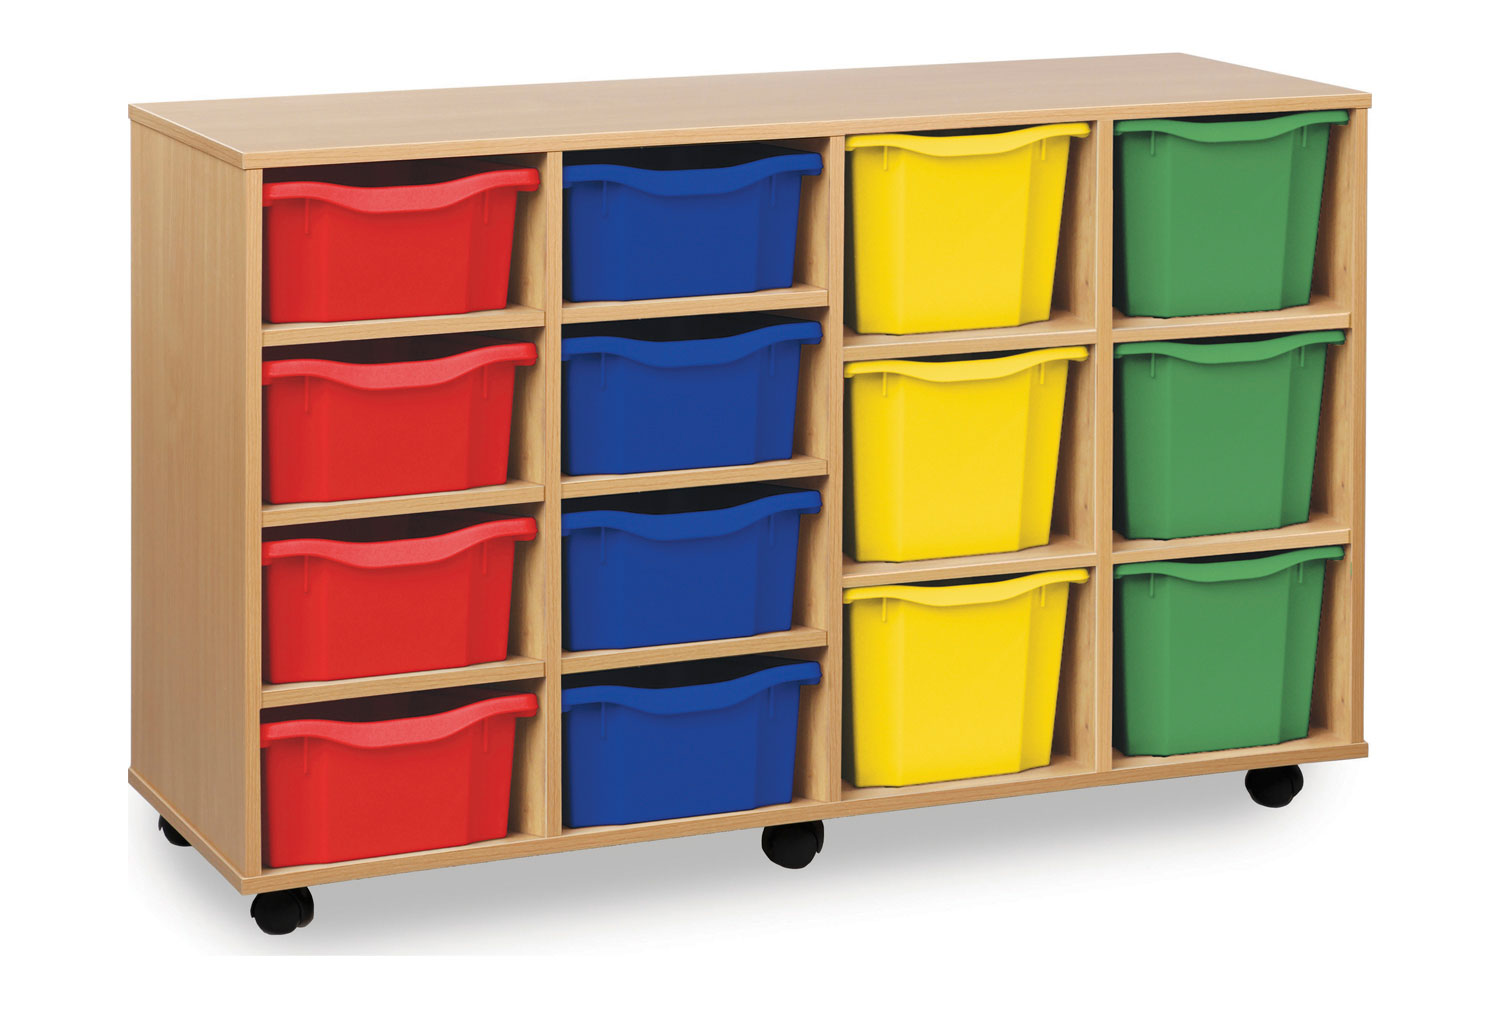 Variety Classroom Tray Storage Unit With 14 Classroom Trays, Pink/Purple/Lime/Tangerine Classroom Trays